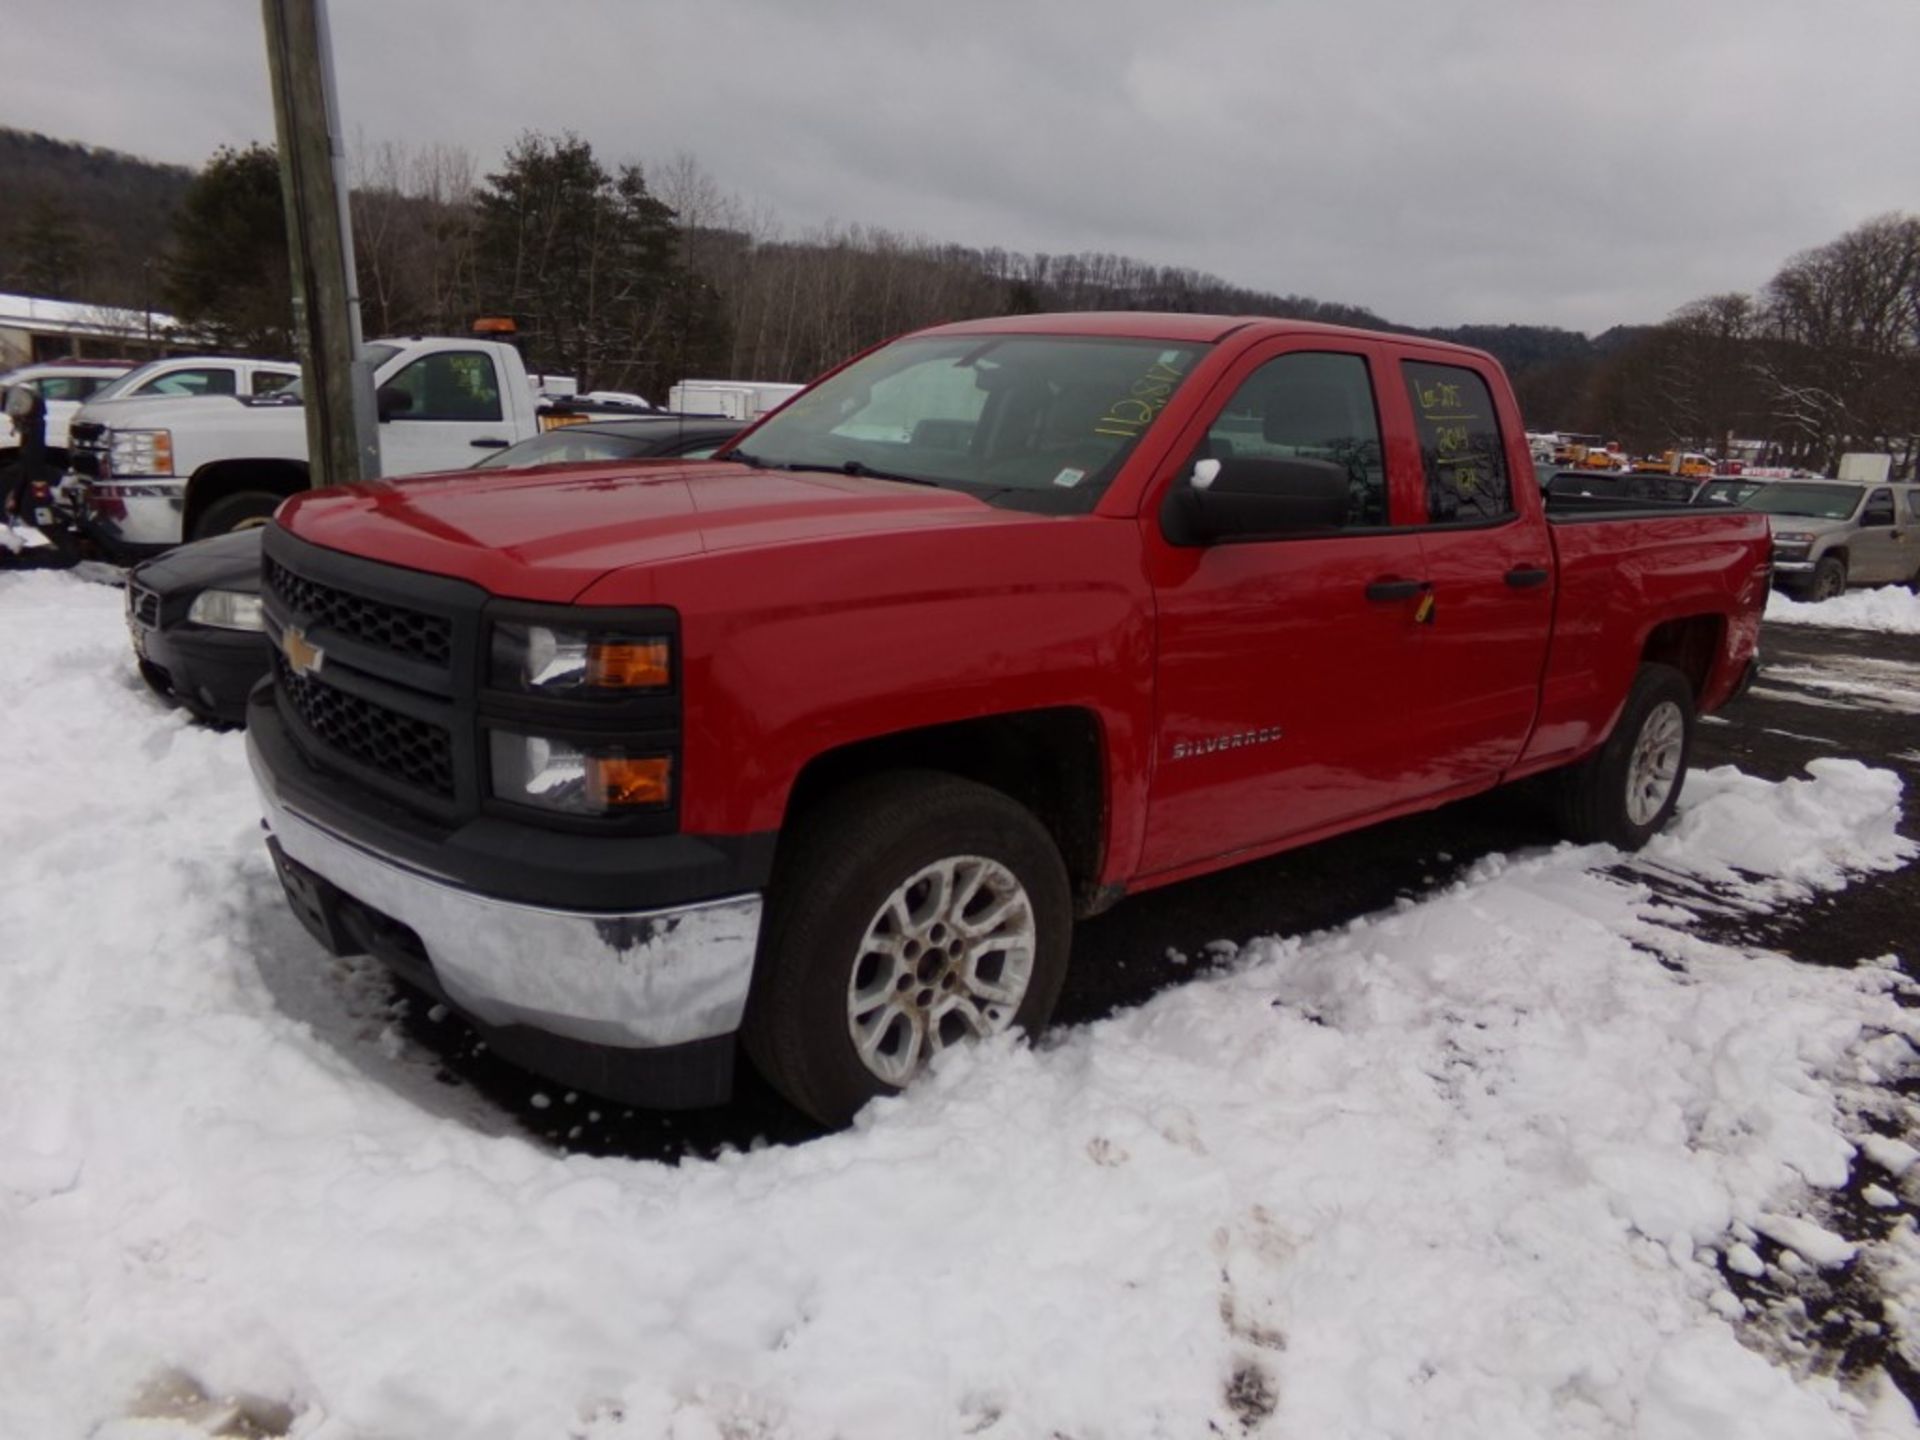 2014 Chevrolet Silverado 1500 4X4, Double Cab, Aftermarket Tail Lights, Toneau Cover, W/T, Red,